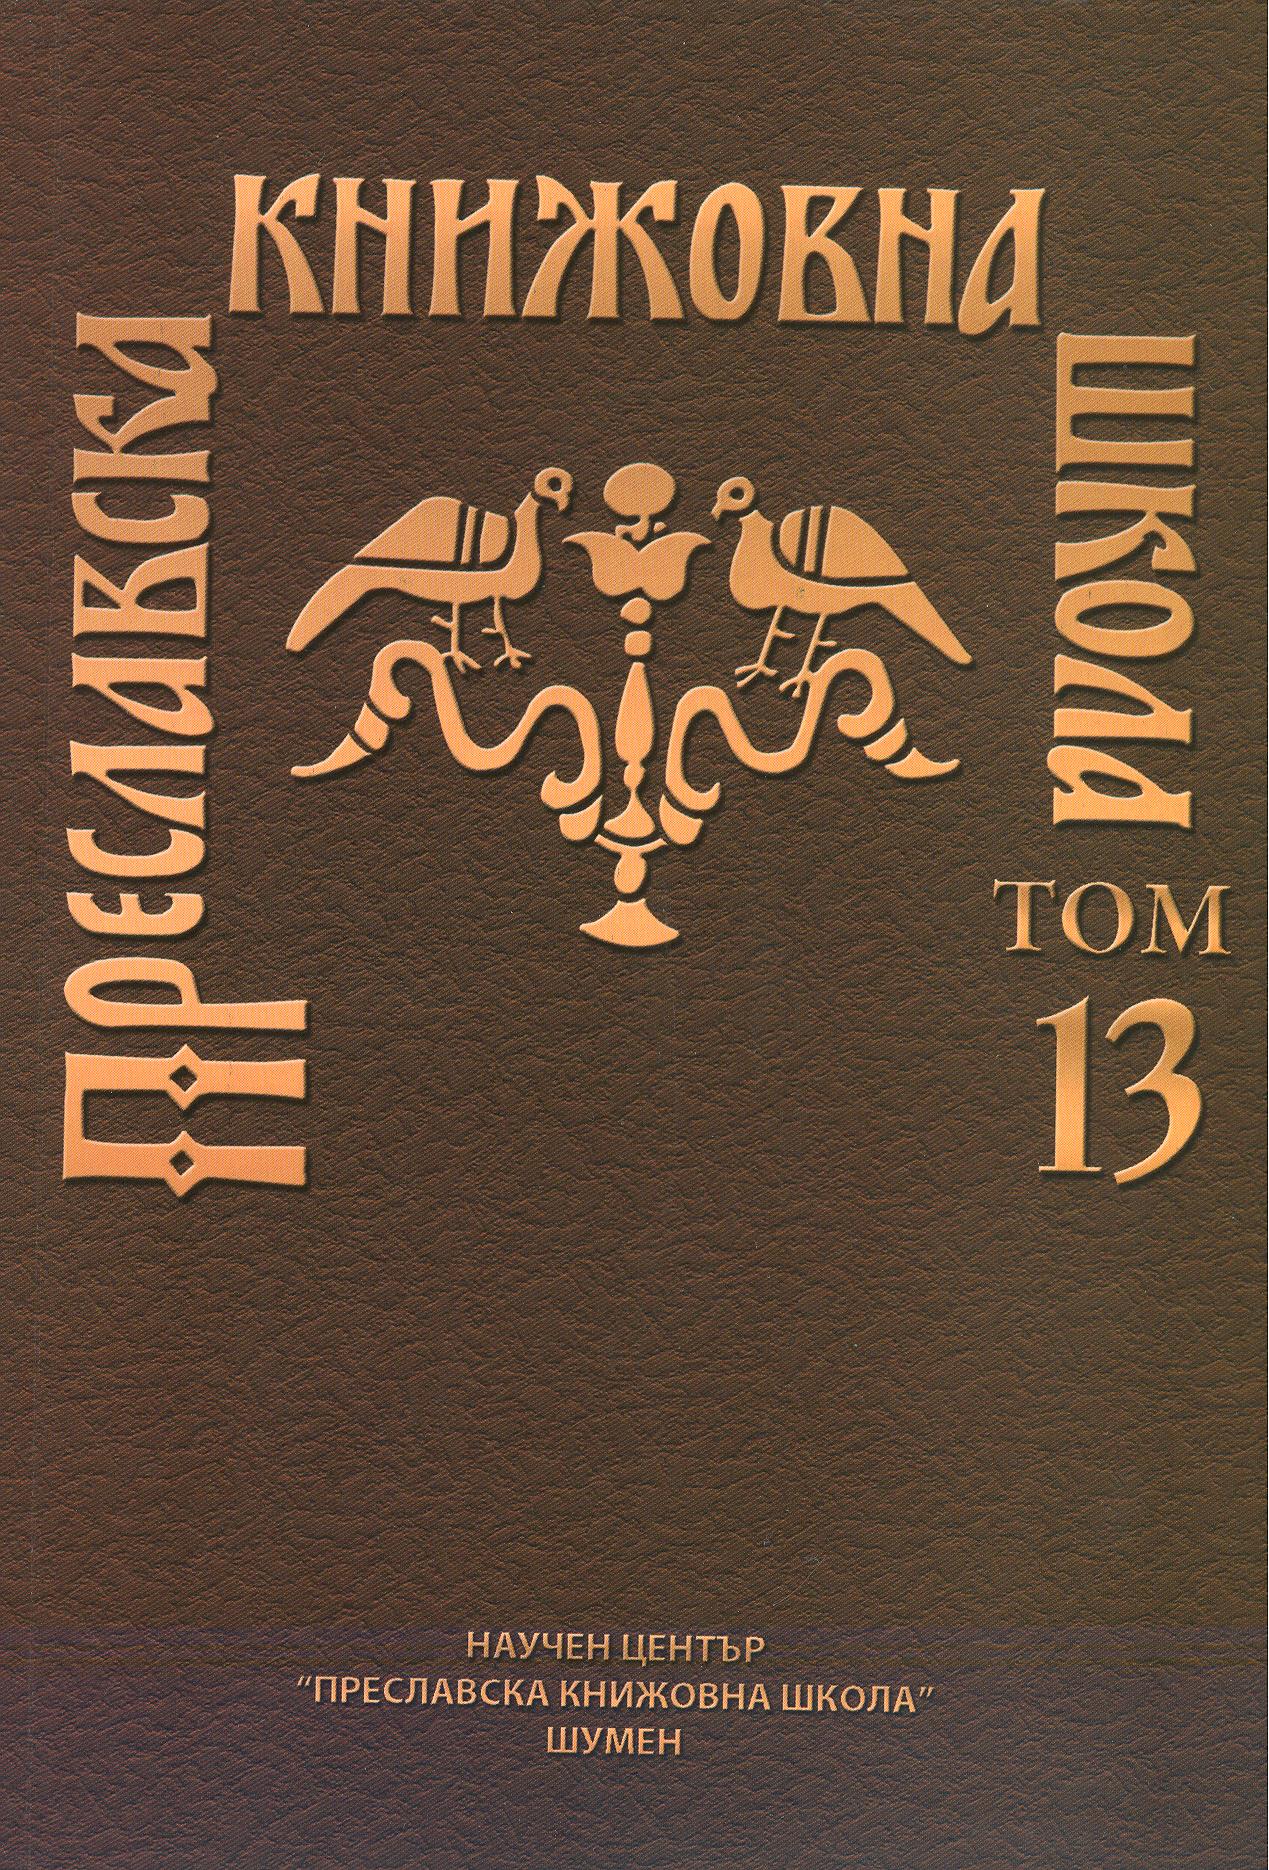 THE SLAVONIC MONTHLY STICHERARION AS THE CONTINUATION OF THE OLD BULGARIAN MENAIA TRADITION Cover Image